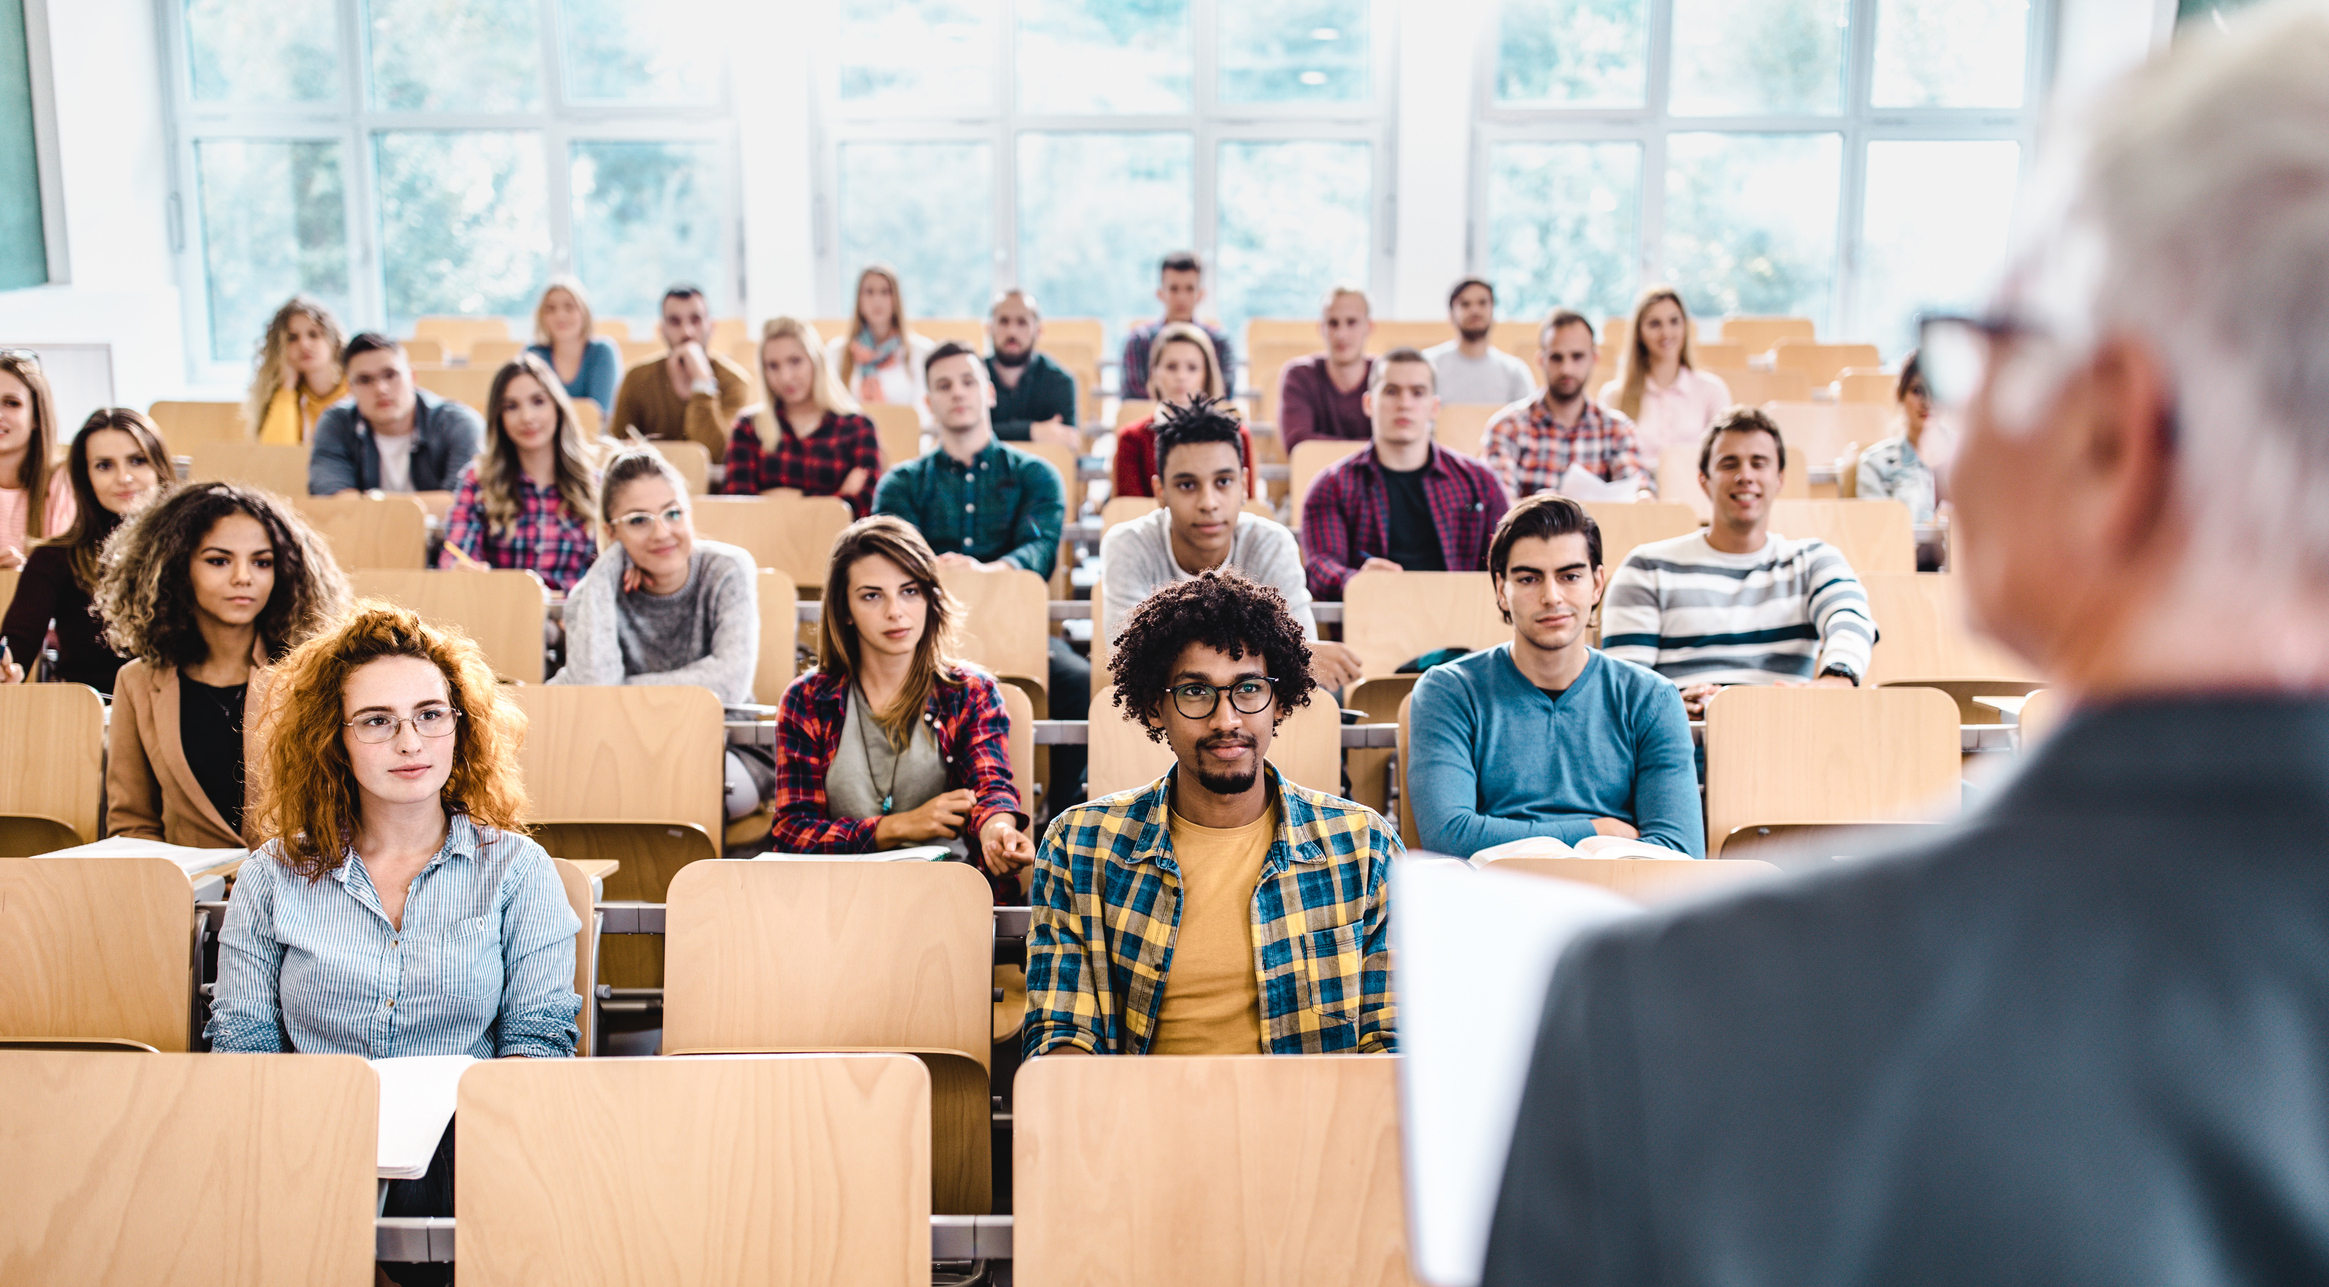 A diverse group of students attentively listening to a lecturer in a university classroom